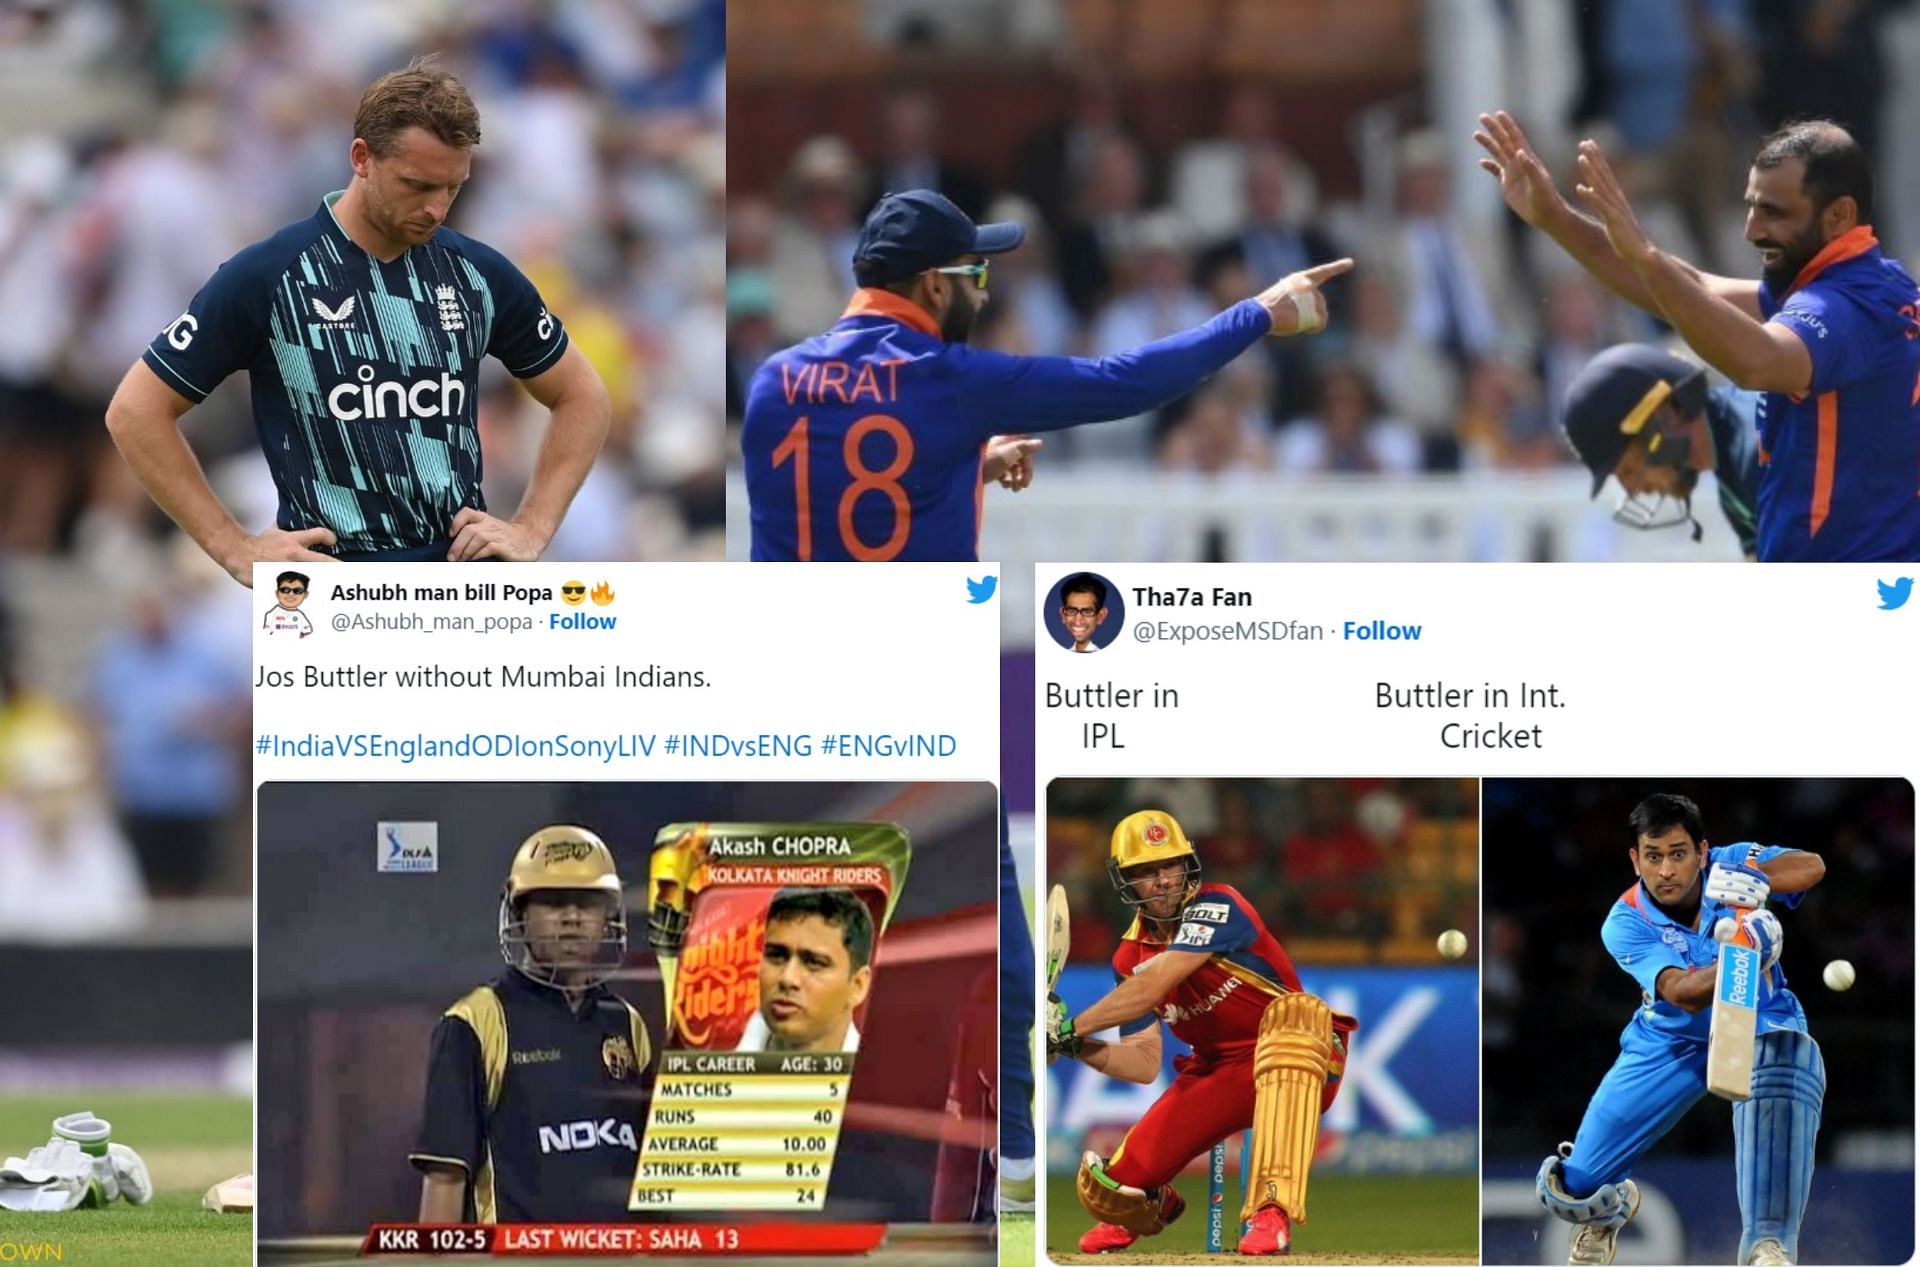 Fans trolled Jos Buttler for his meager returns with the bat after becoming captain.